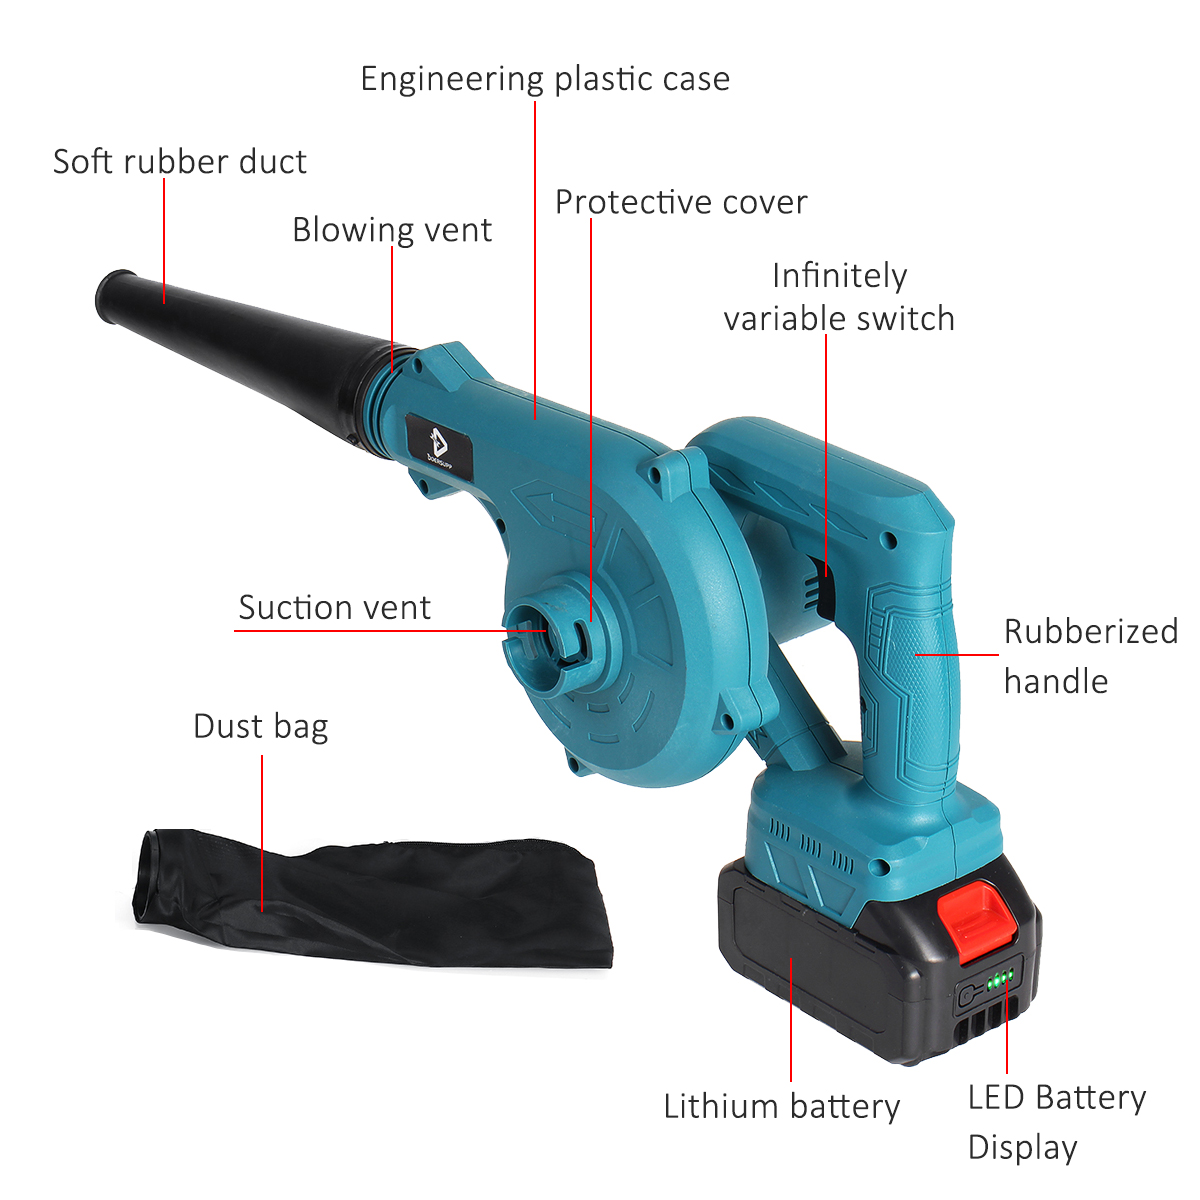 Doersupp-2-IN-1-Cordless-Electric-Air-Blower-Vacuum-Computer-Dust-Cleaner-Leaf-Blower-Battery-Displa-1860679-11